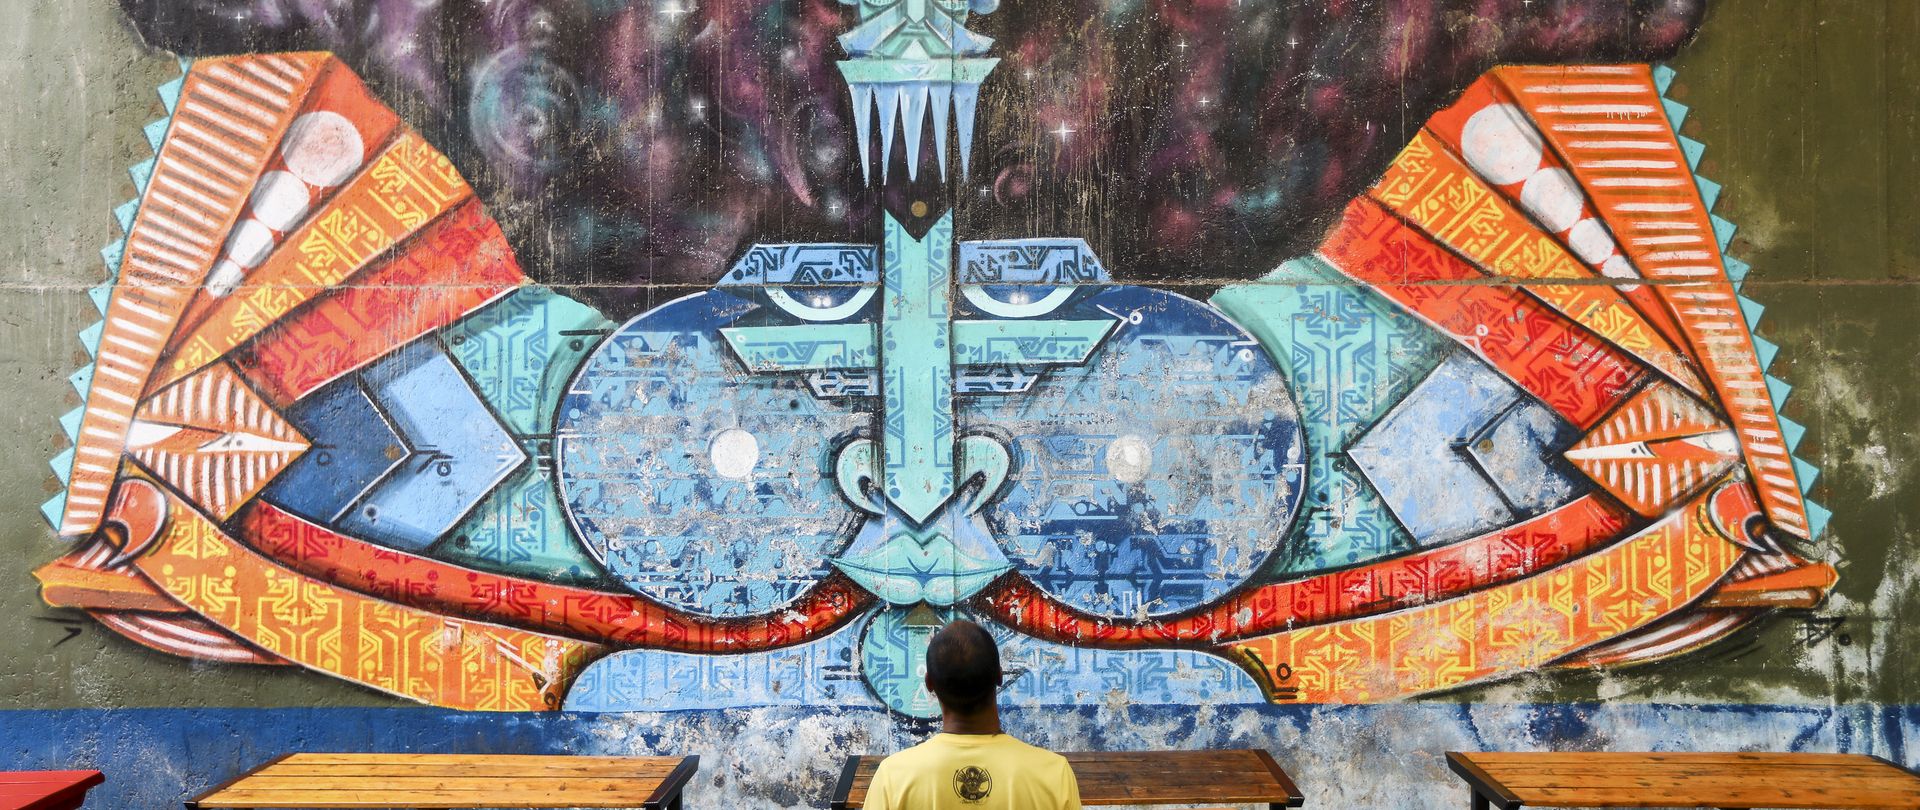 Kenyan graffiti artist Bhupi Jethwa has left his colourful mark on numerous walls, sharing his vision through large-scale paintings. 